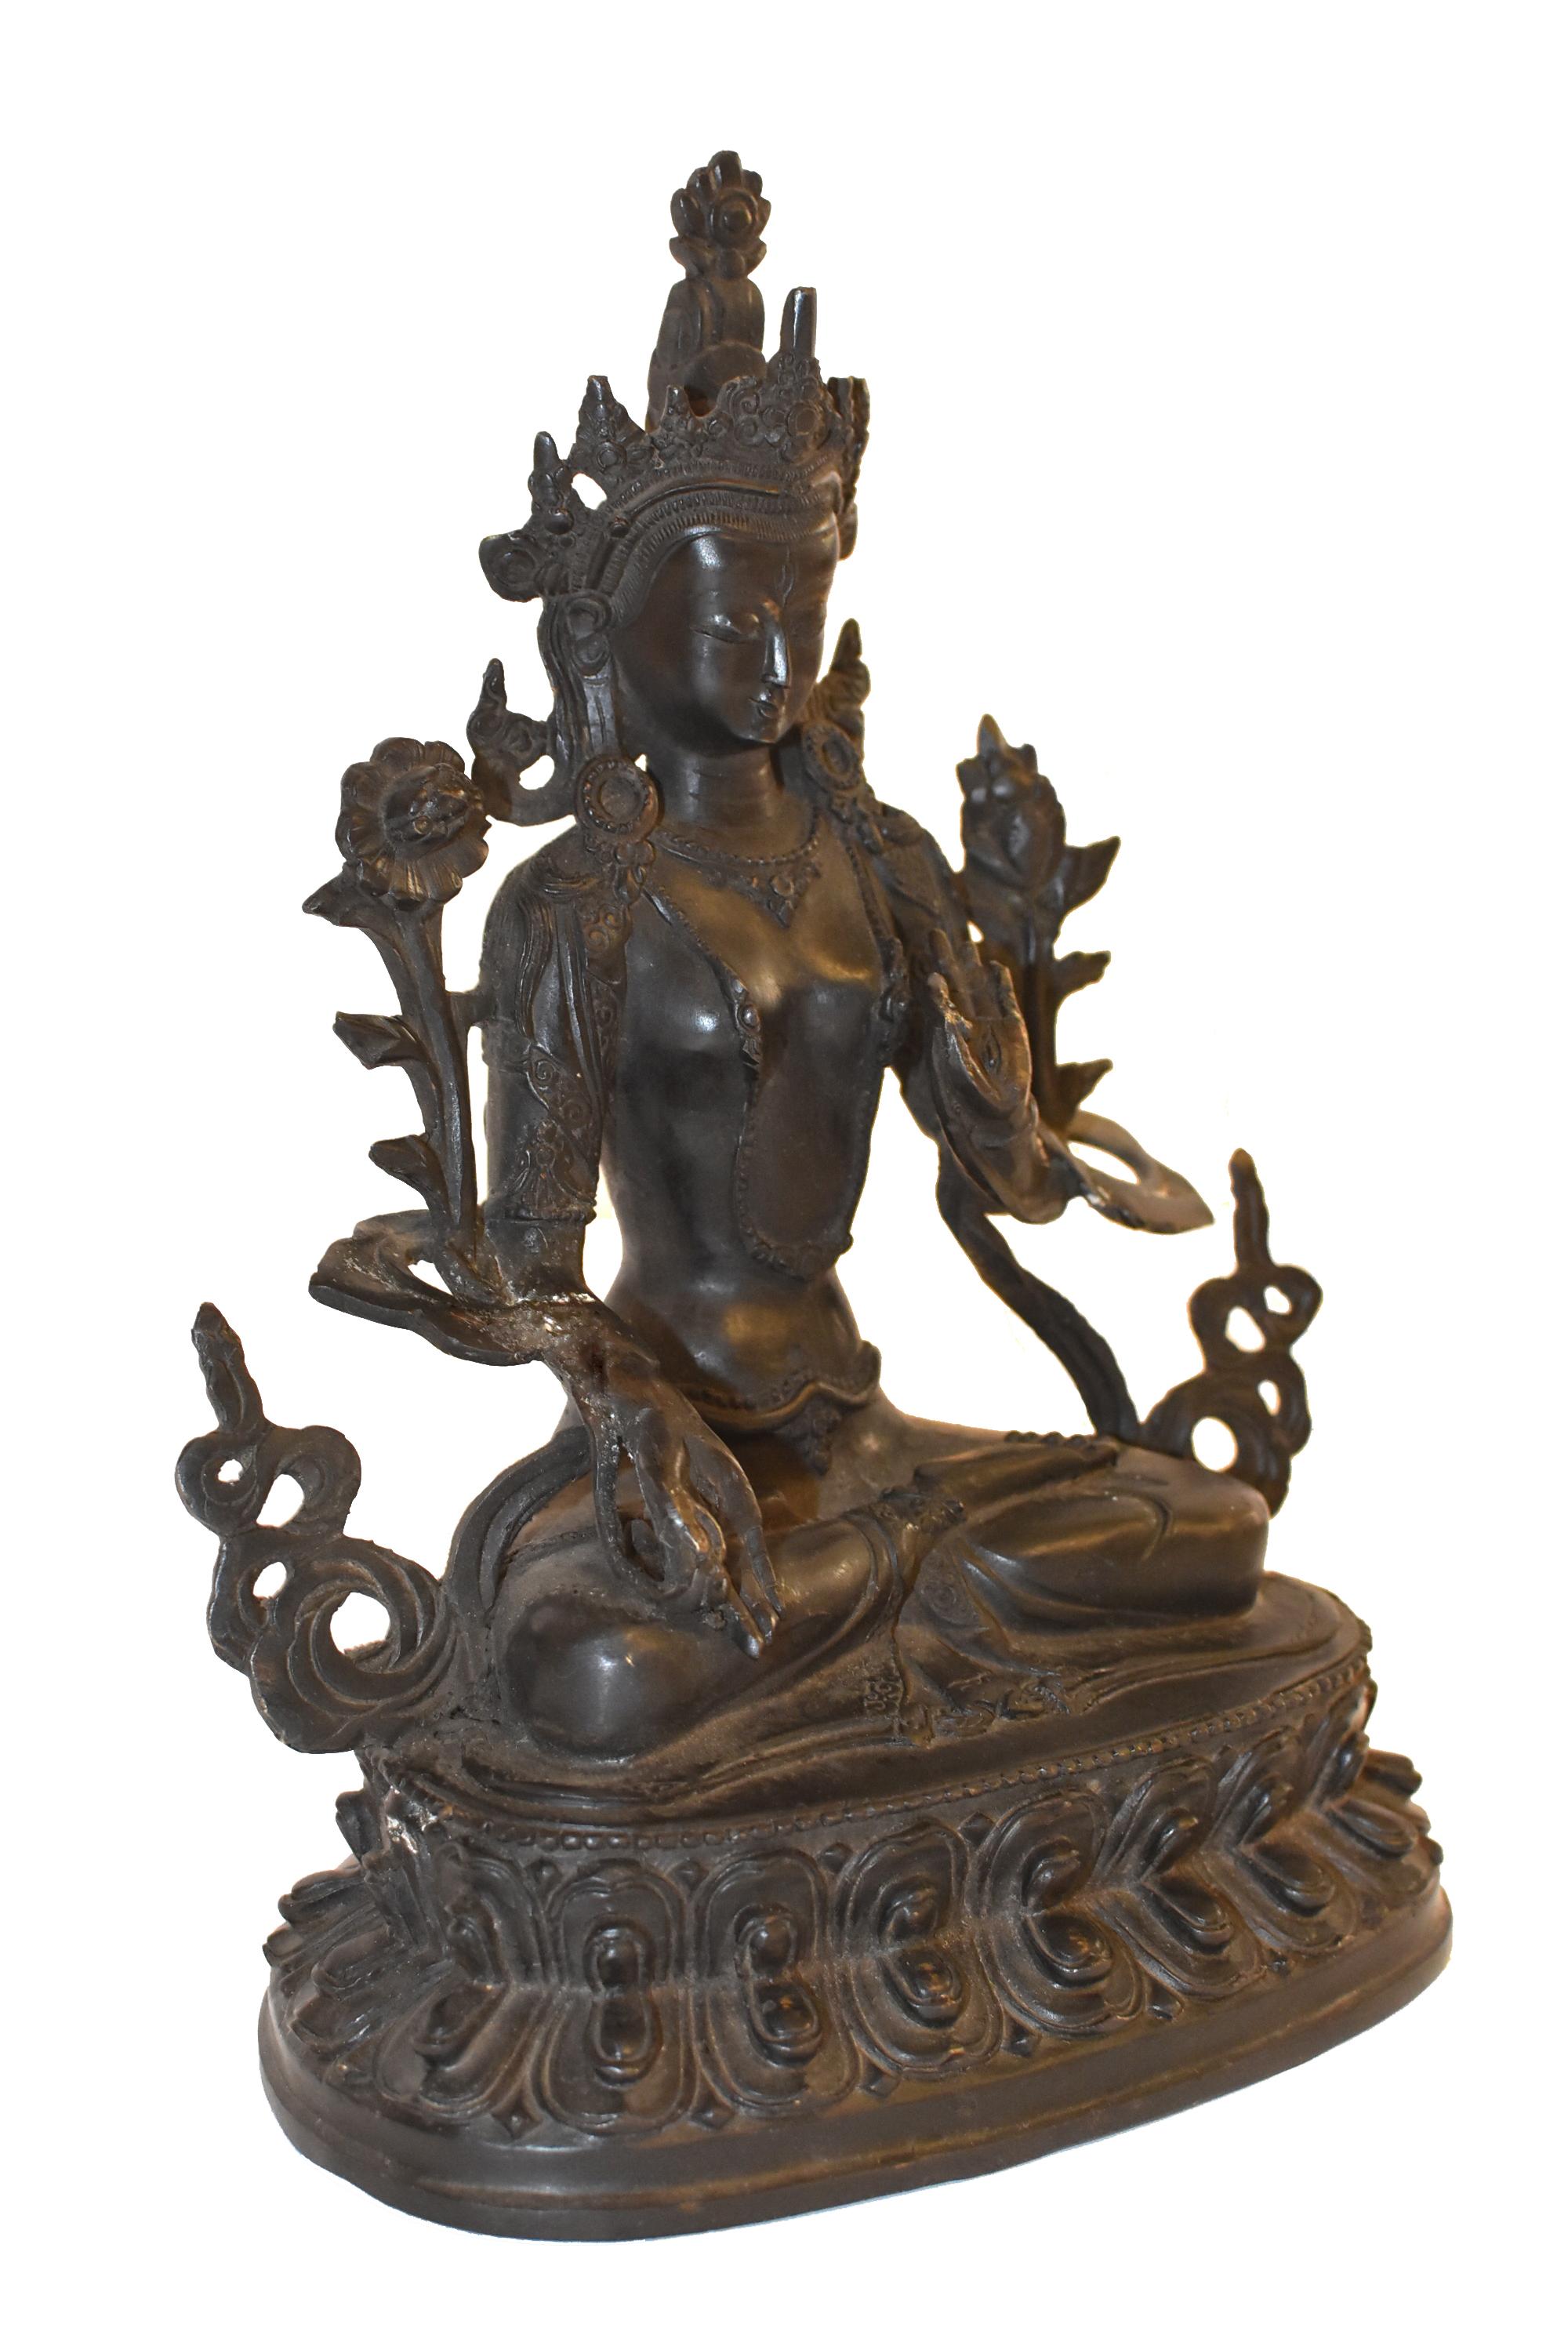 The Tibetan White Tara is regarded as consort of Avalokiteswara. Seated in vajrasana on a lotiform base, holding a lotus stem in her left hand, her right hand in jnana mudra, gesture of teaching. She has an extra eye on her forehead, palm and feet